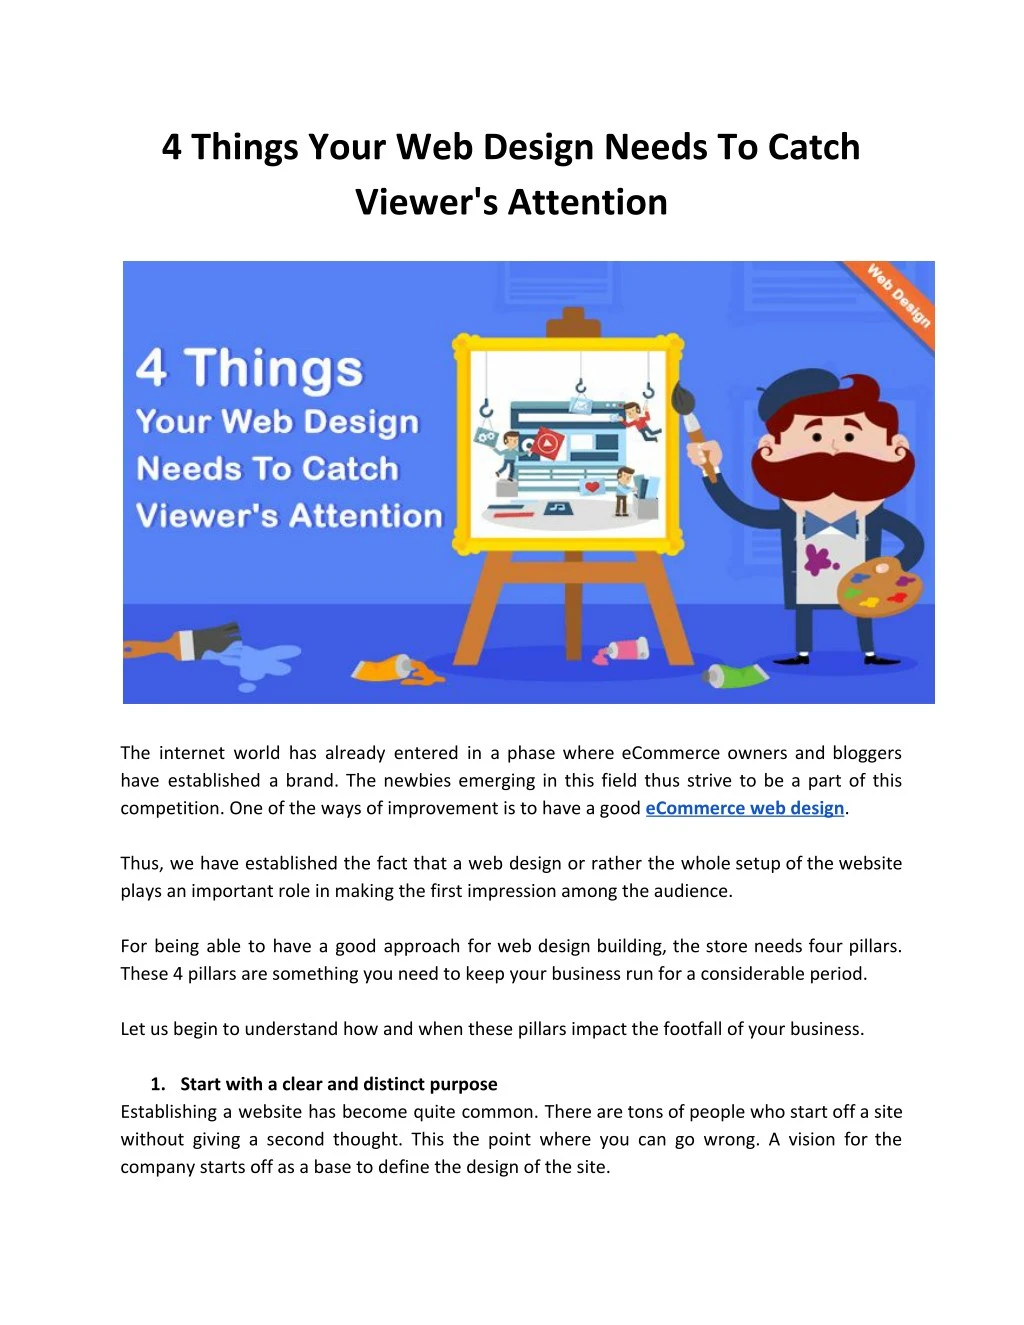 4 things your web design needs to catch viewer